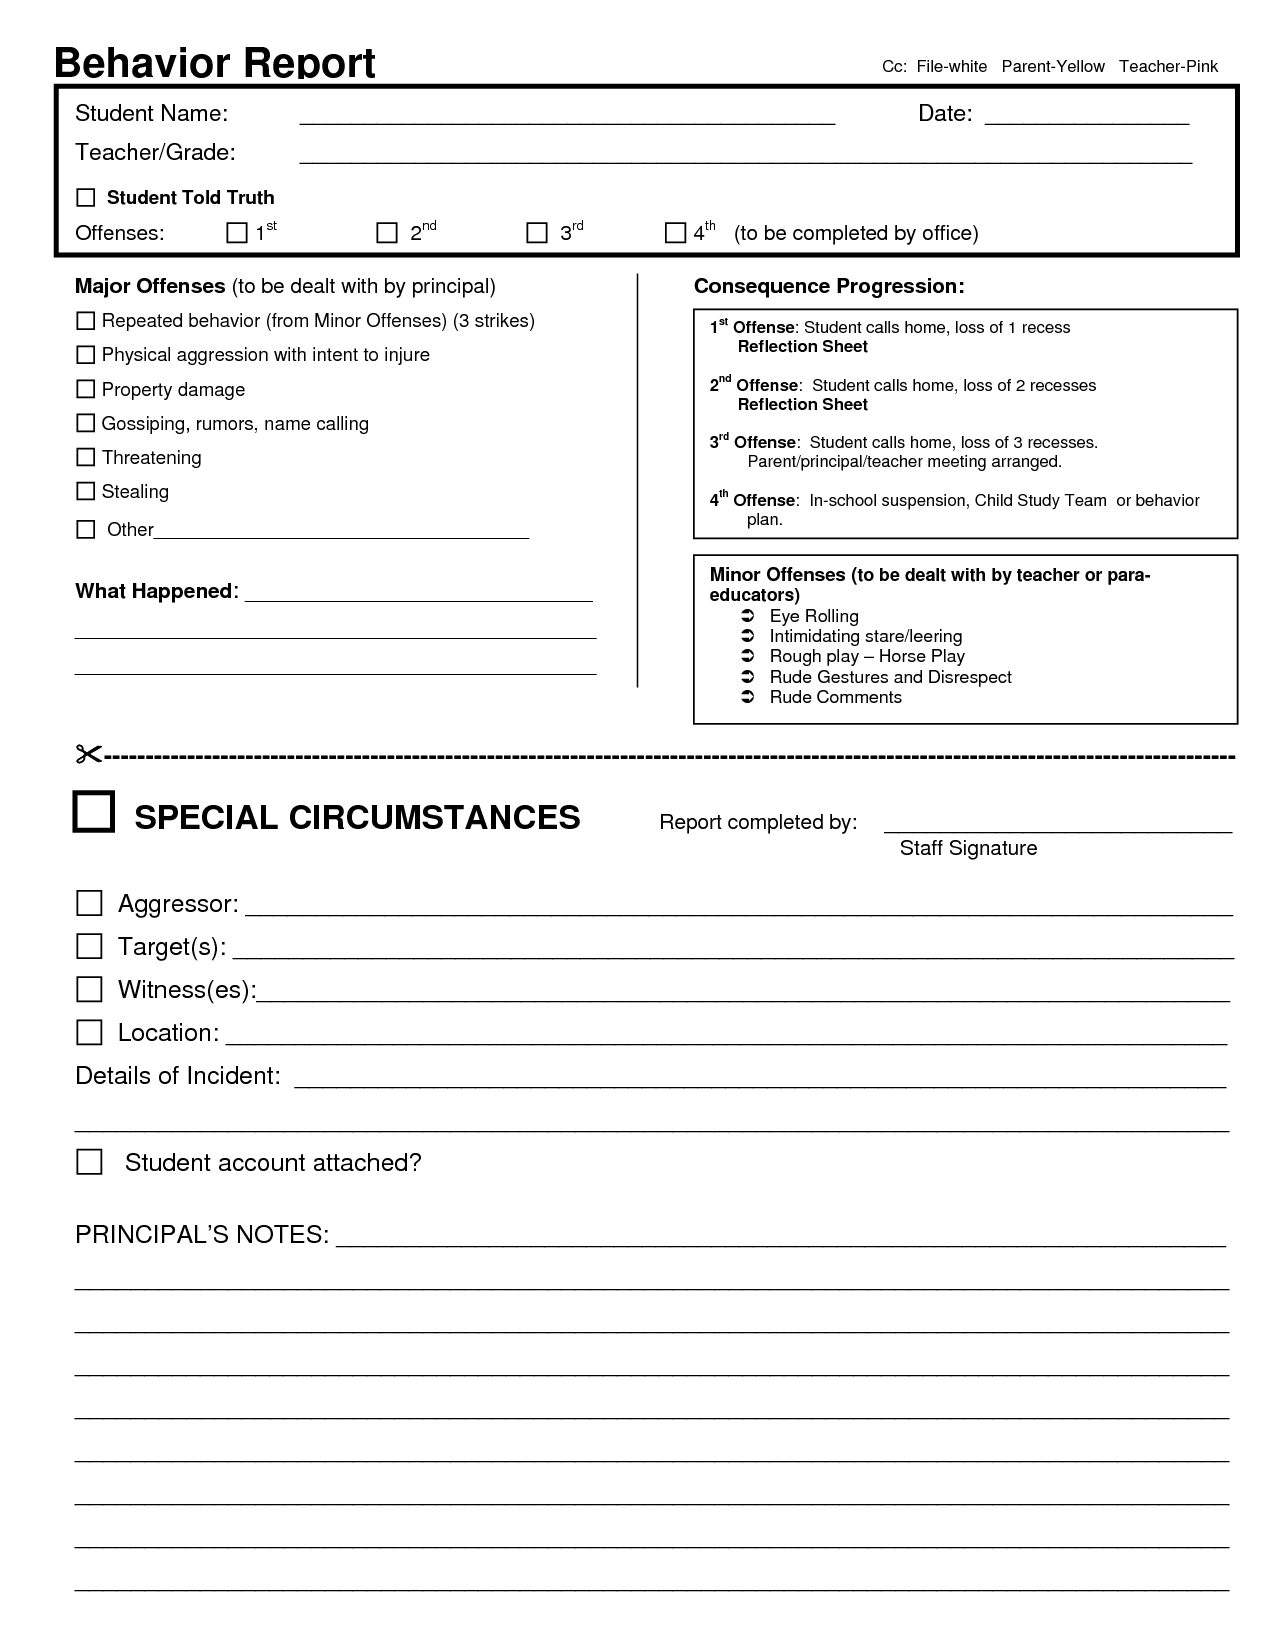 Behavior Report Template | Behavior Report Cc File White Parent within Free Printable Template Daily Report For Parents